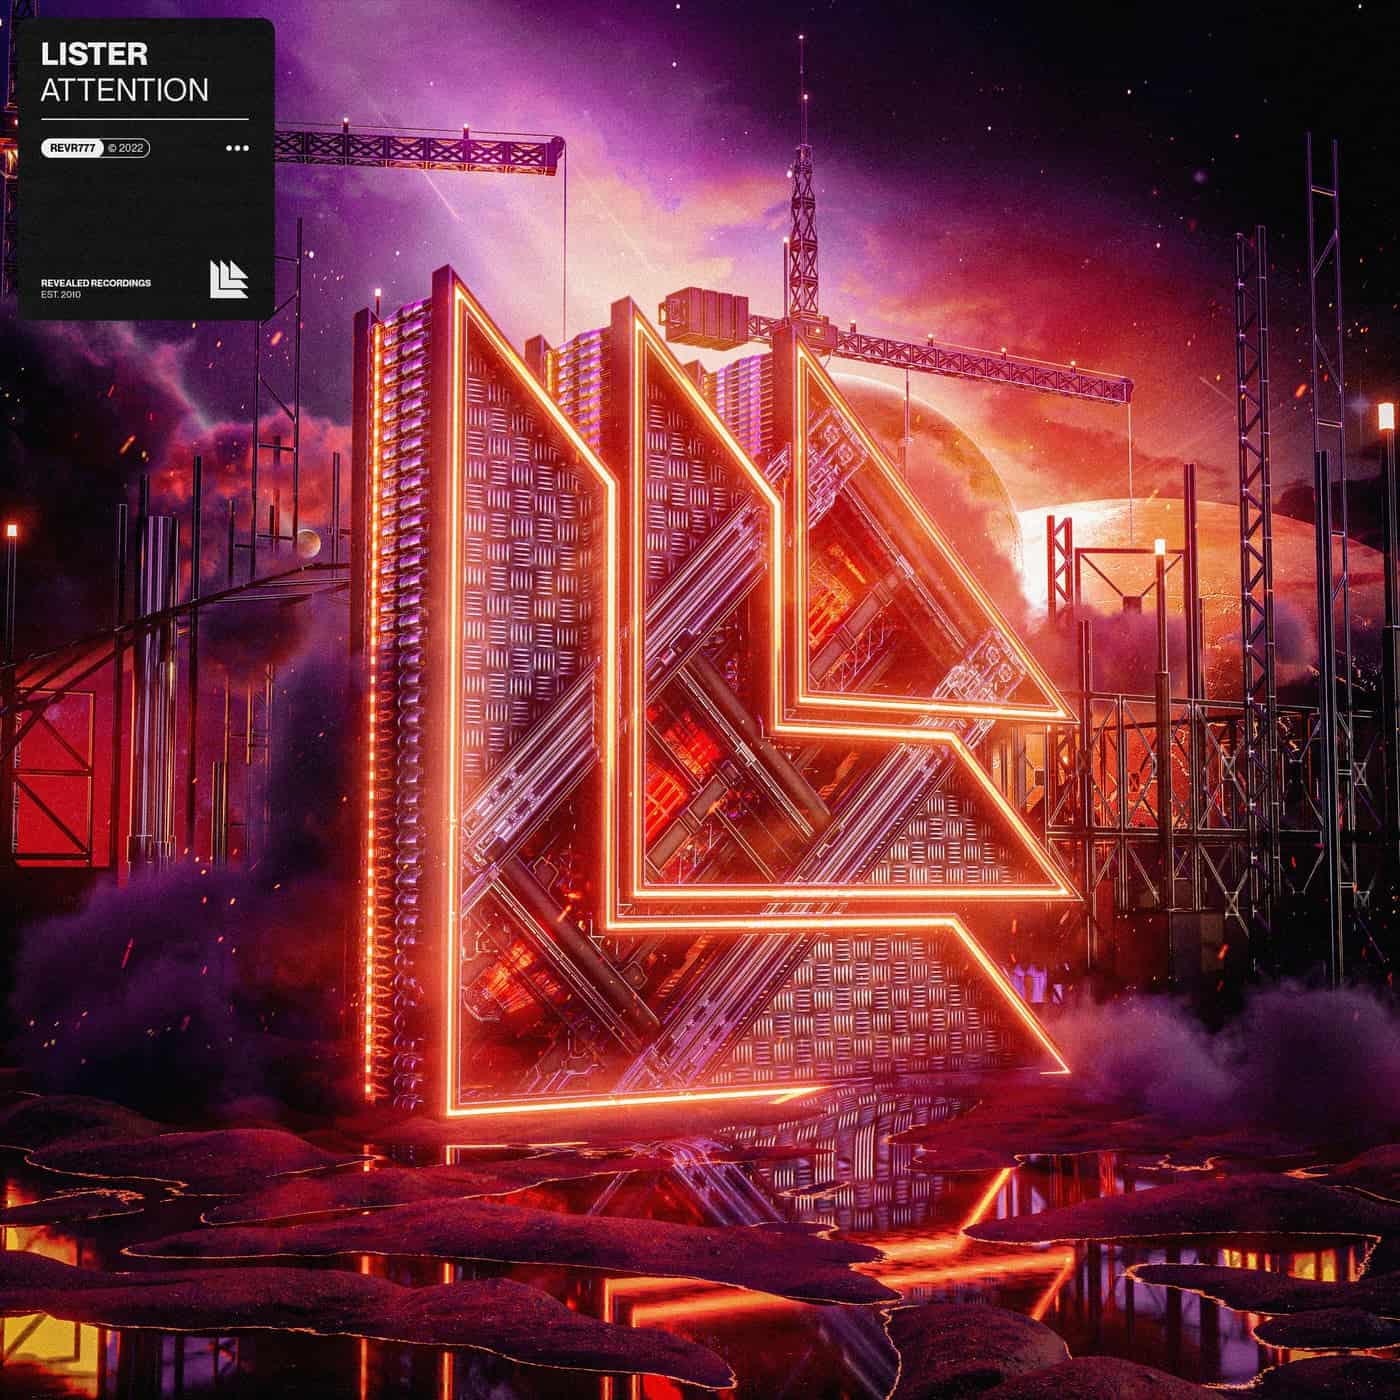 Download Lister - Attention on Electrobuzz